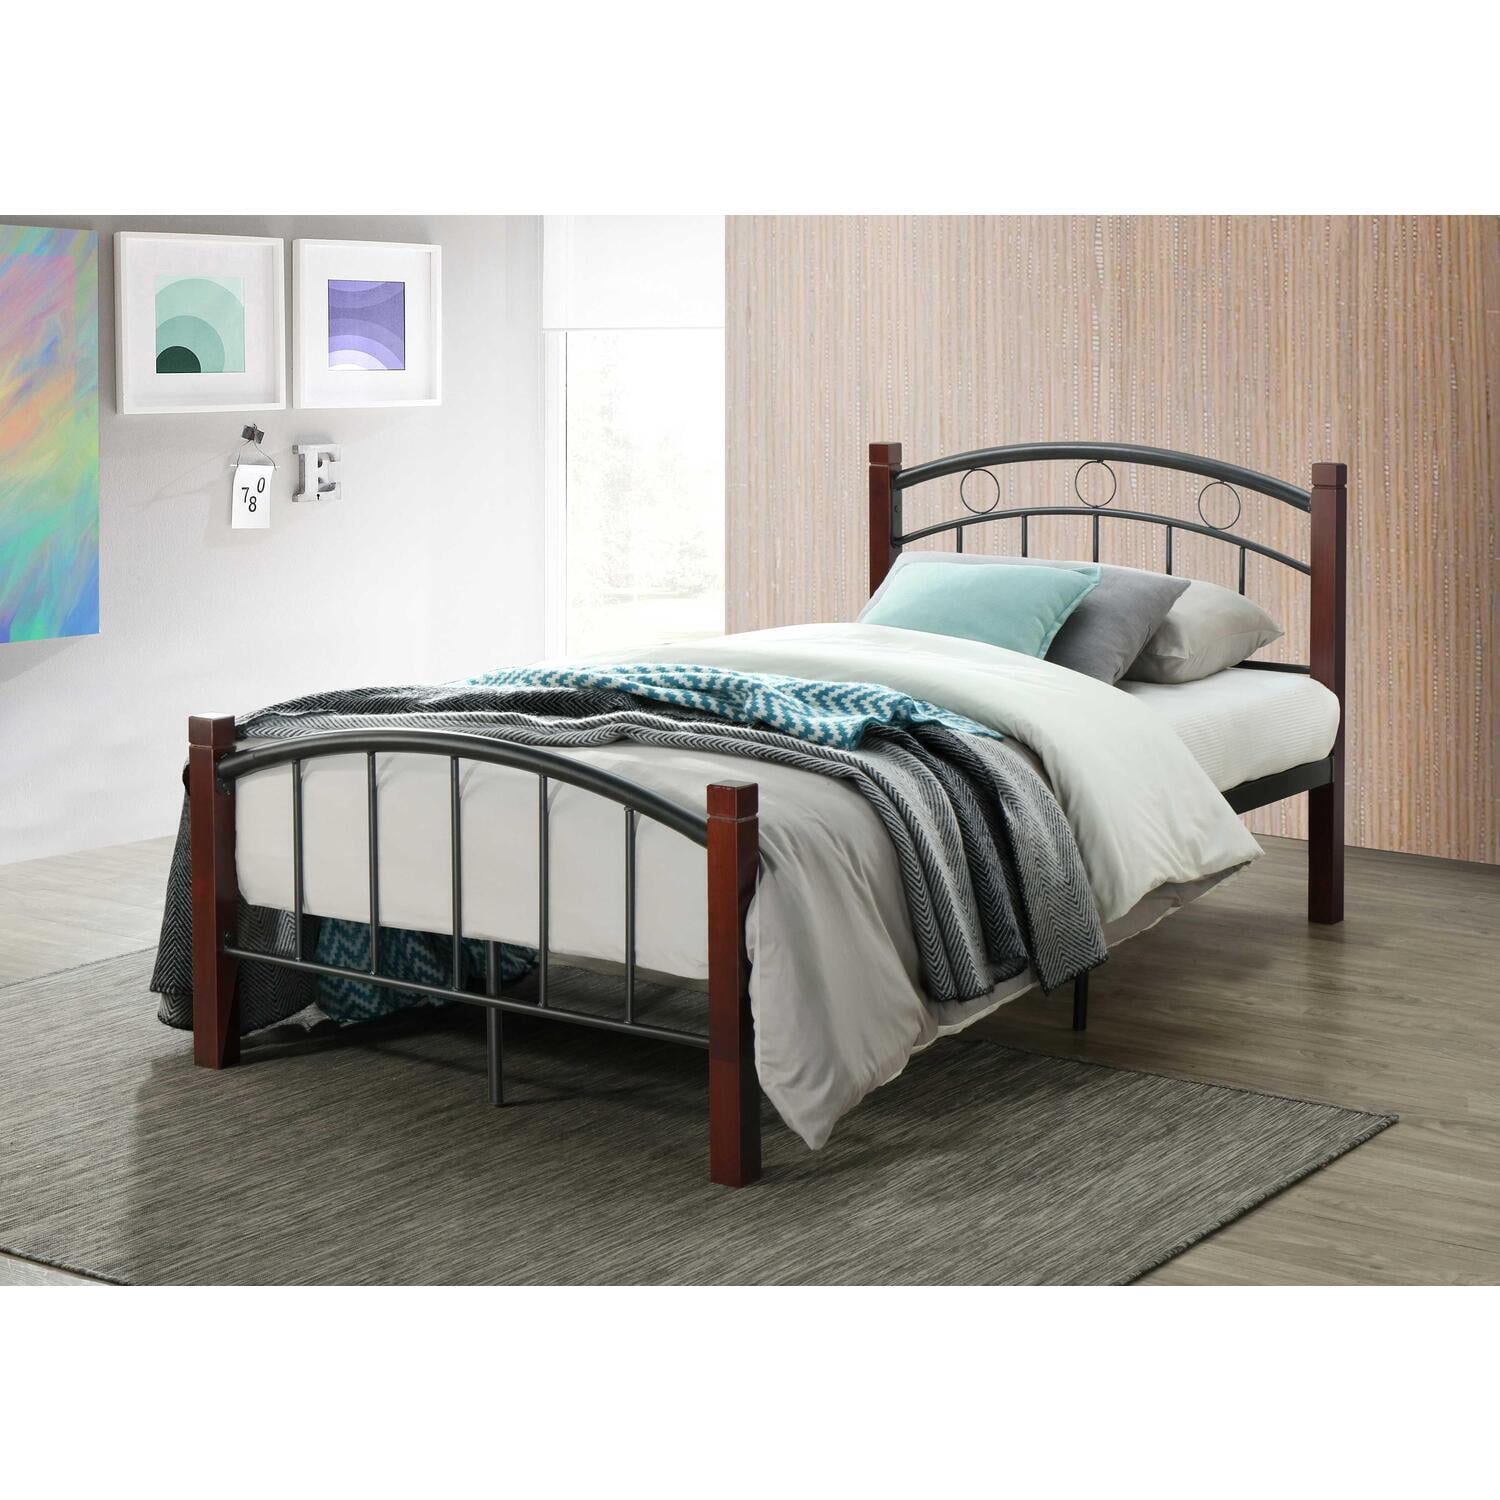 Hodedah Complete Metal Bed With, King Size Bed Rails For Headboard And Footboard